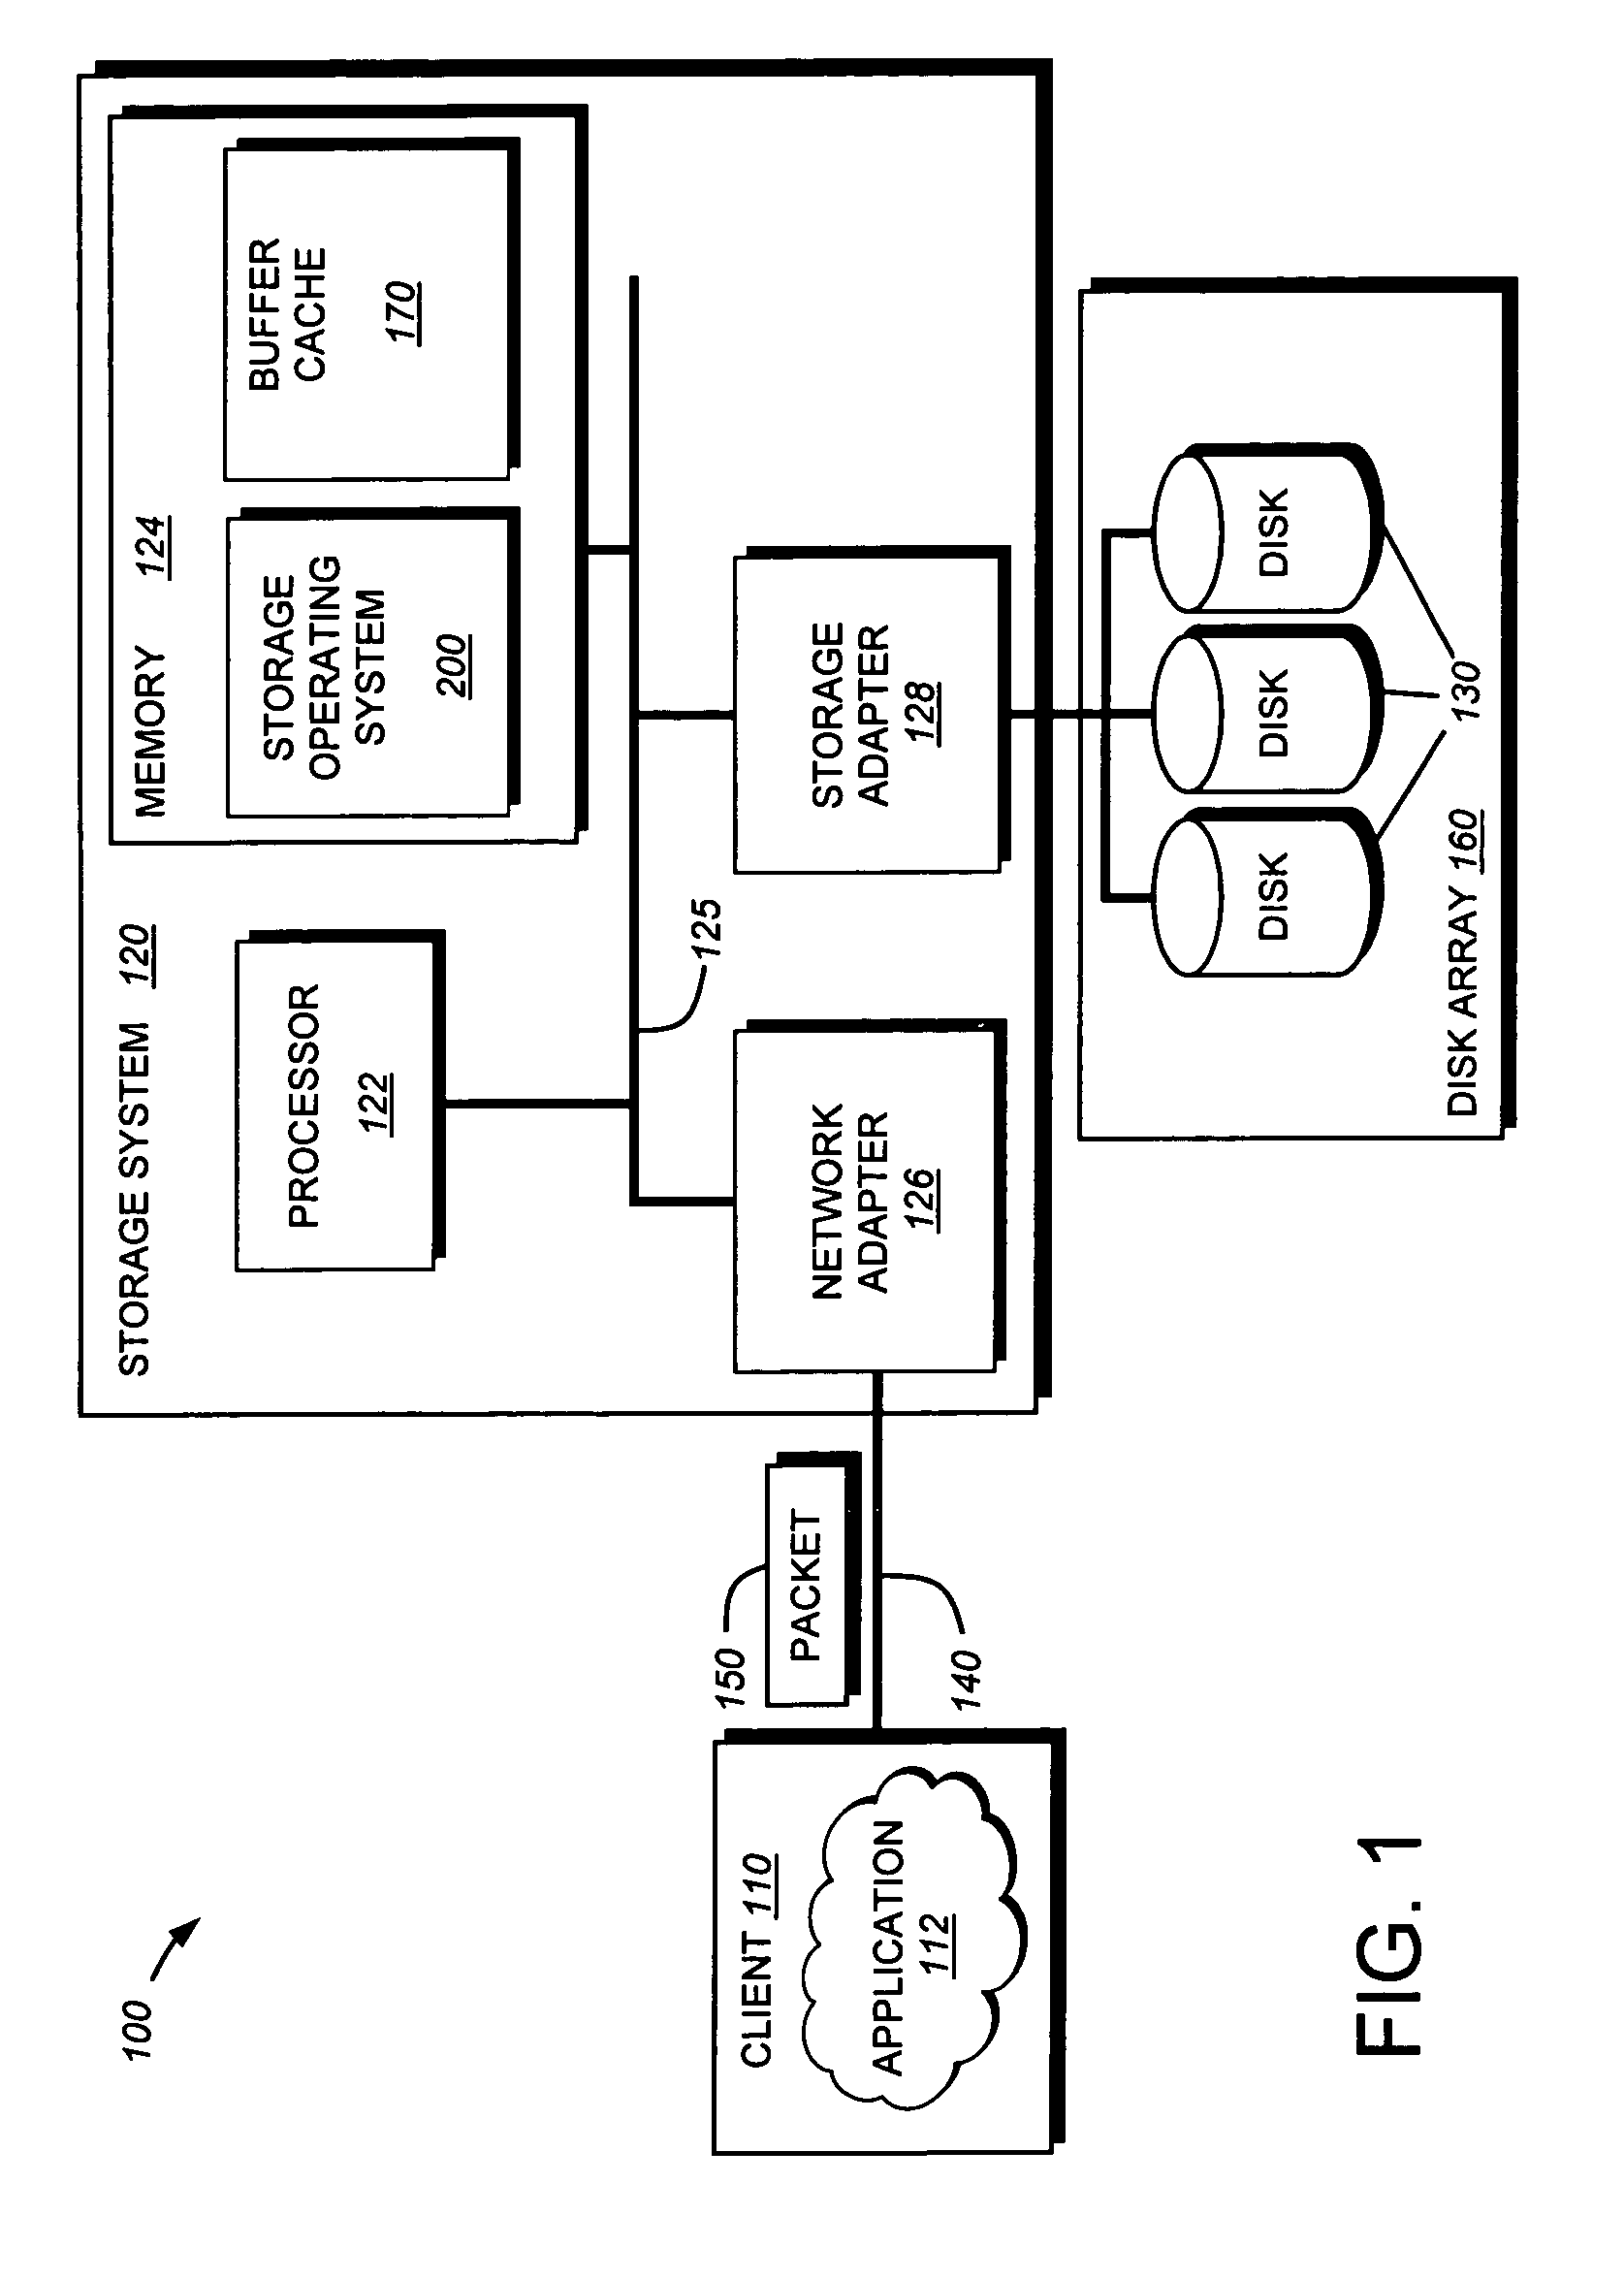 System and method for verifying and restoring the consistency of inode to pathname mappings in a filesystem